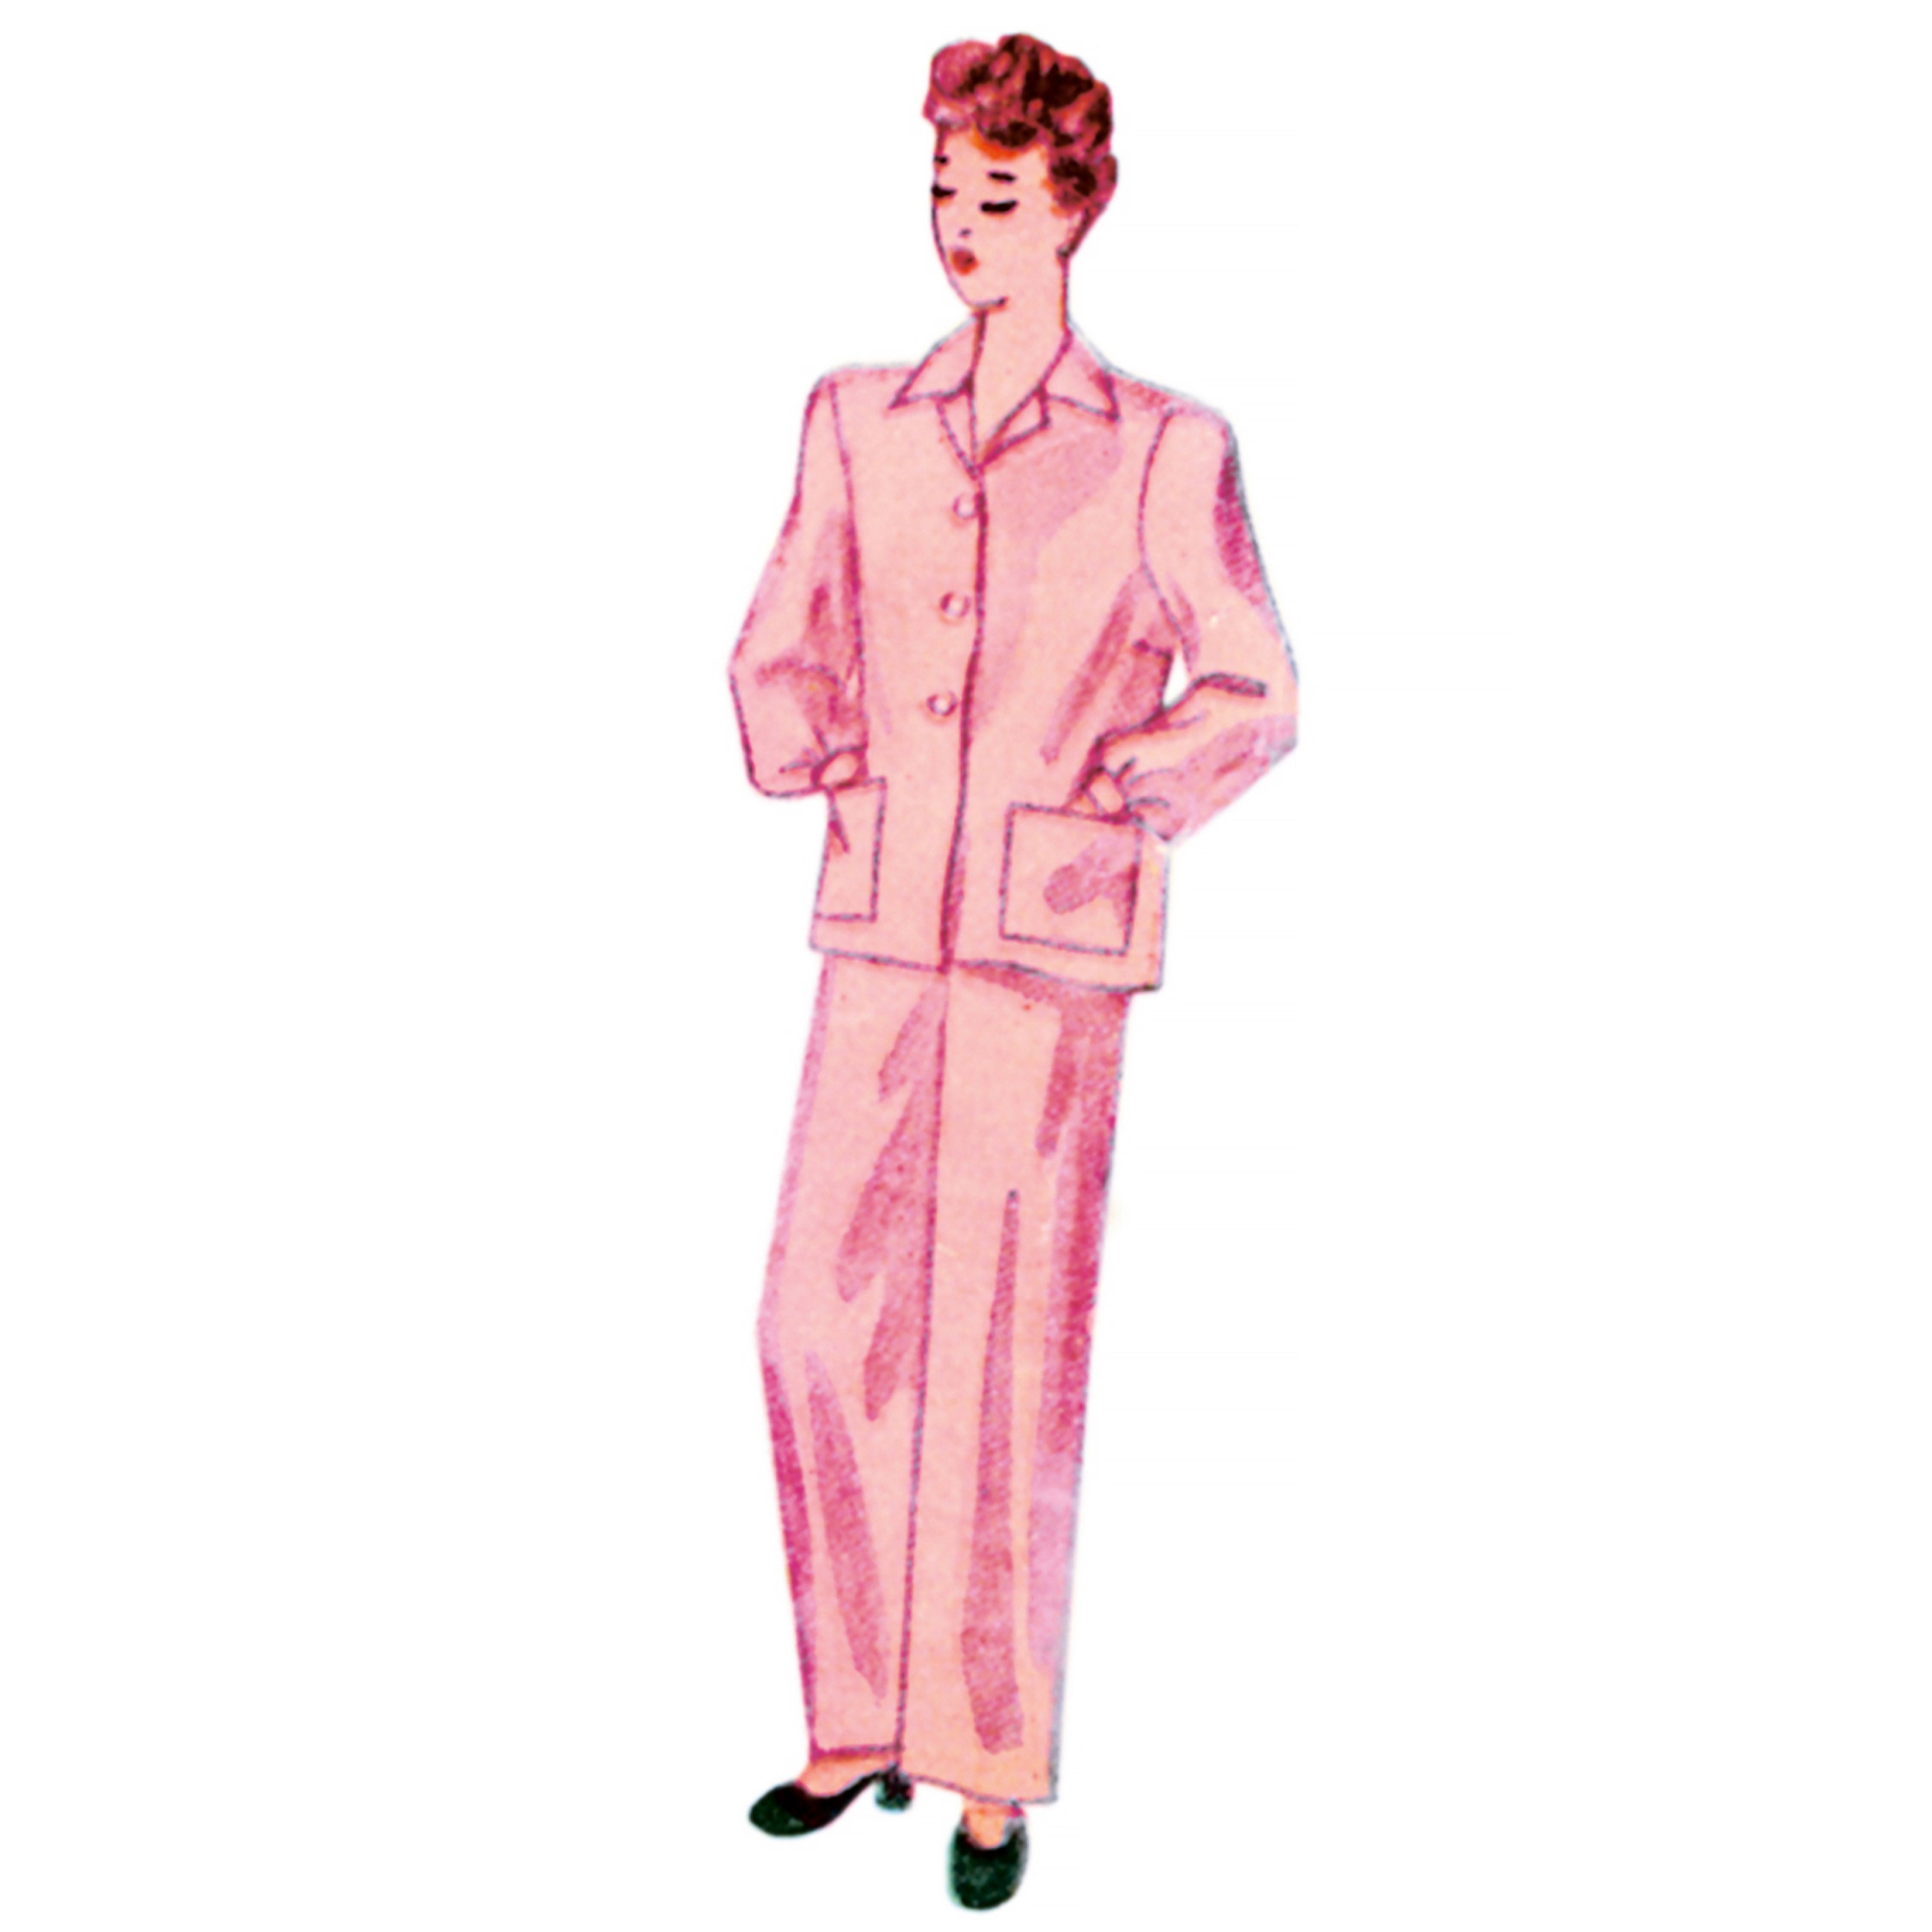 Simplicity sewing pattern 9635 Misses' Vintage Lounge Top and Pants from Jaycotts Sewing Supplies